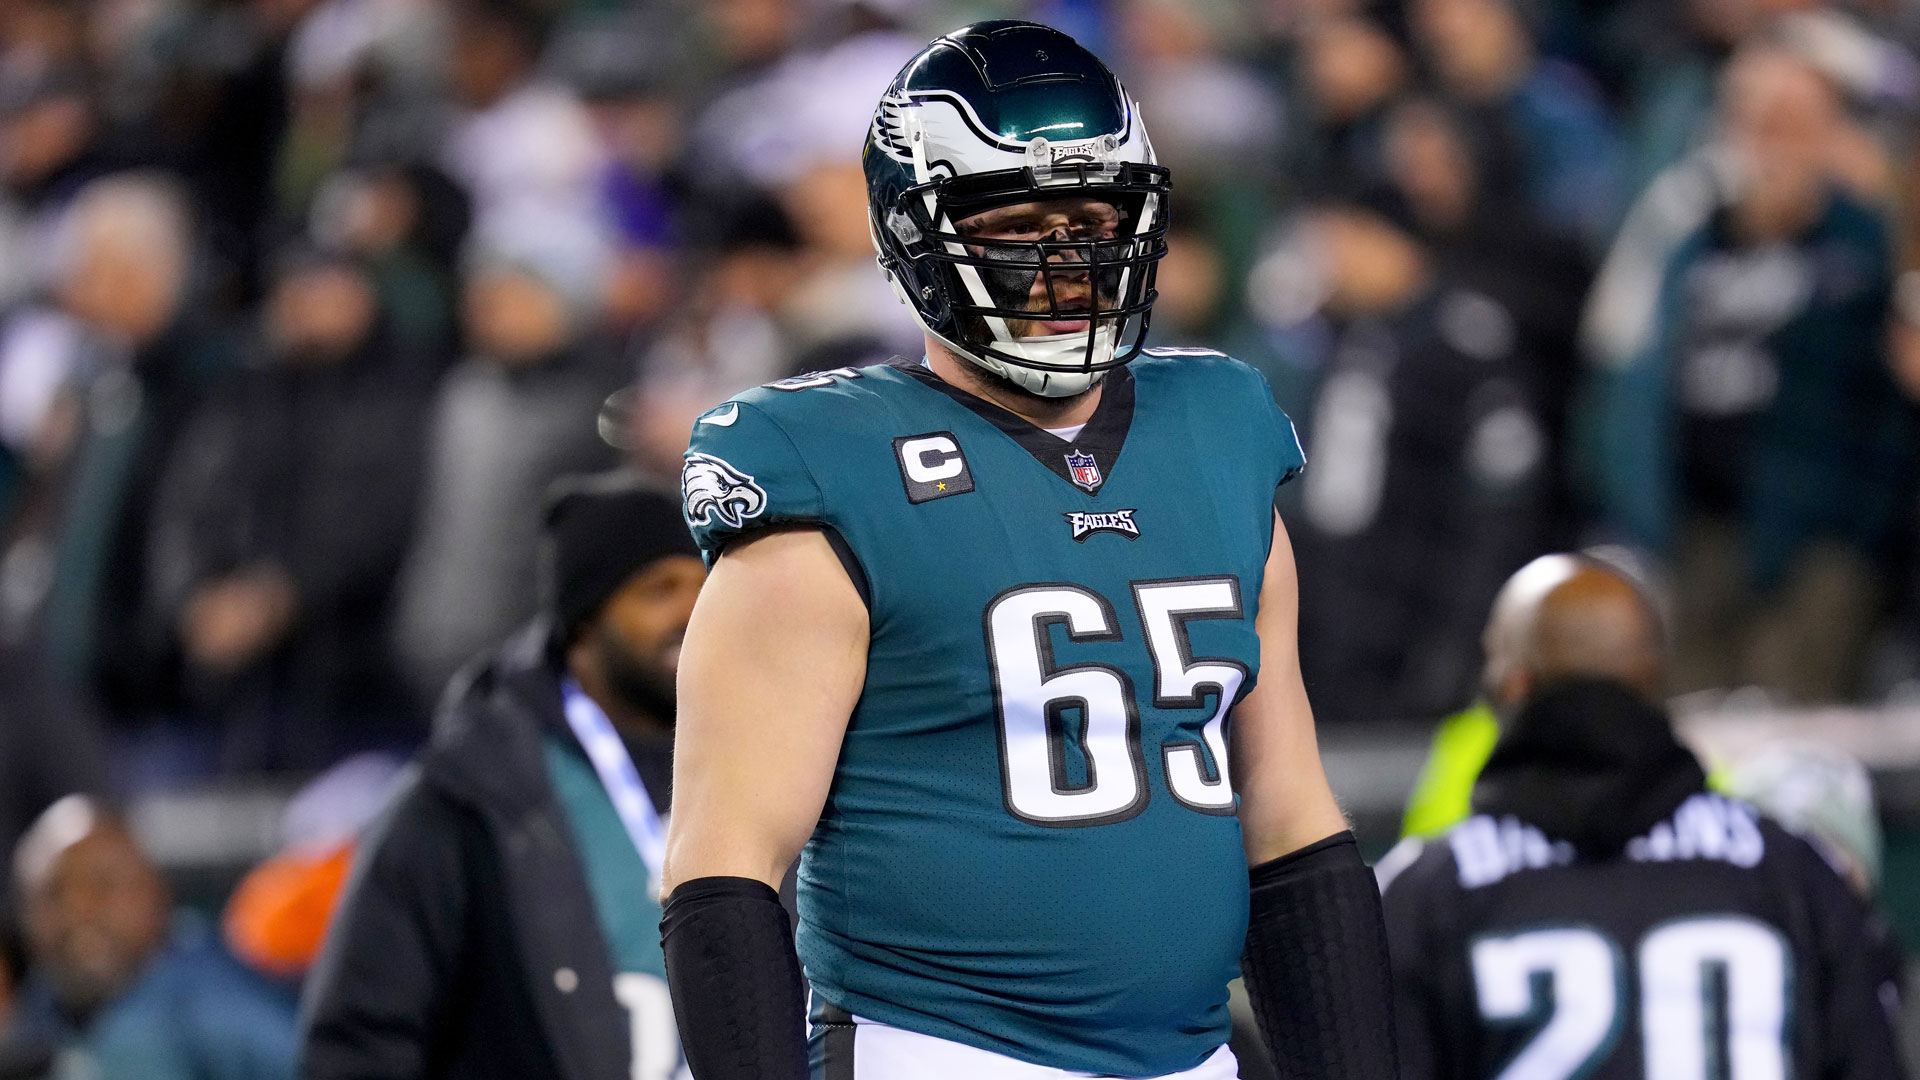 Eagles marvel at Lane Johnson's toughness in playoff win – NBC